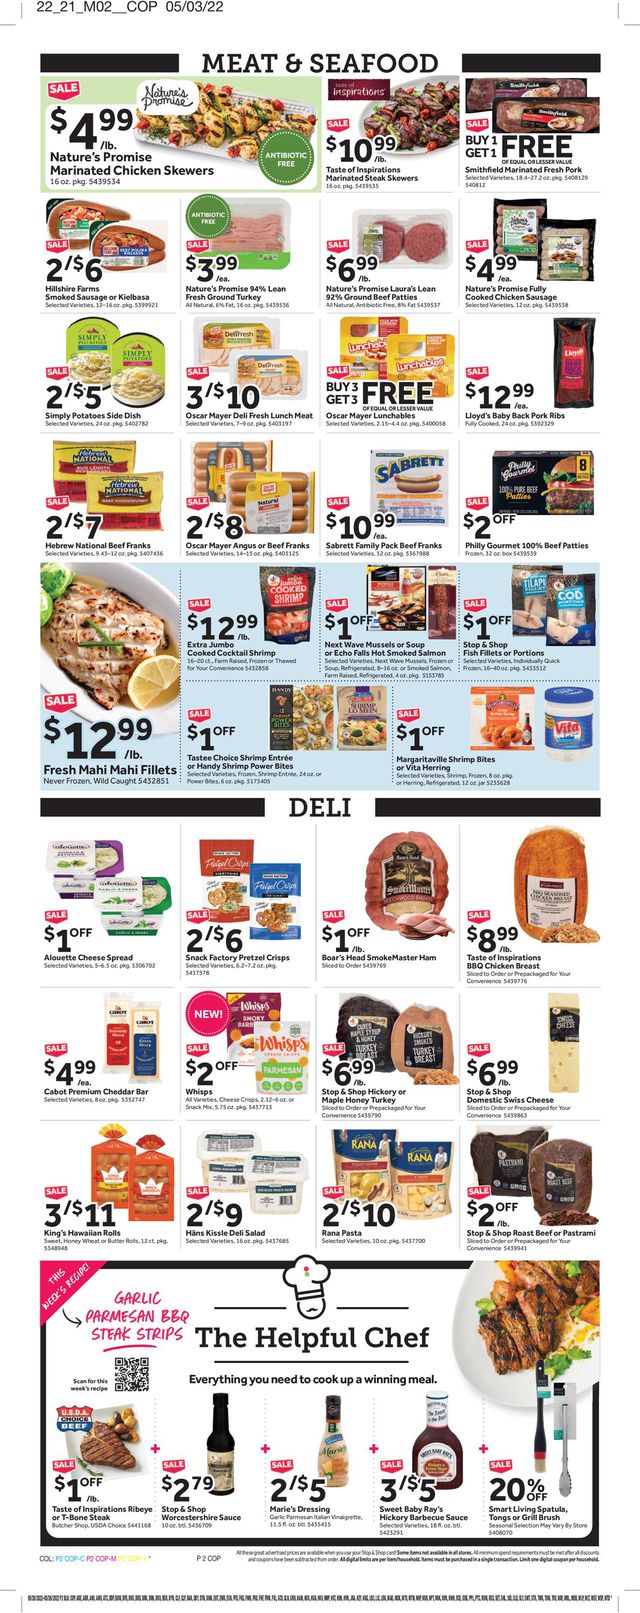 Stop and Shop Ad from 05/20/2022